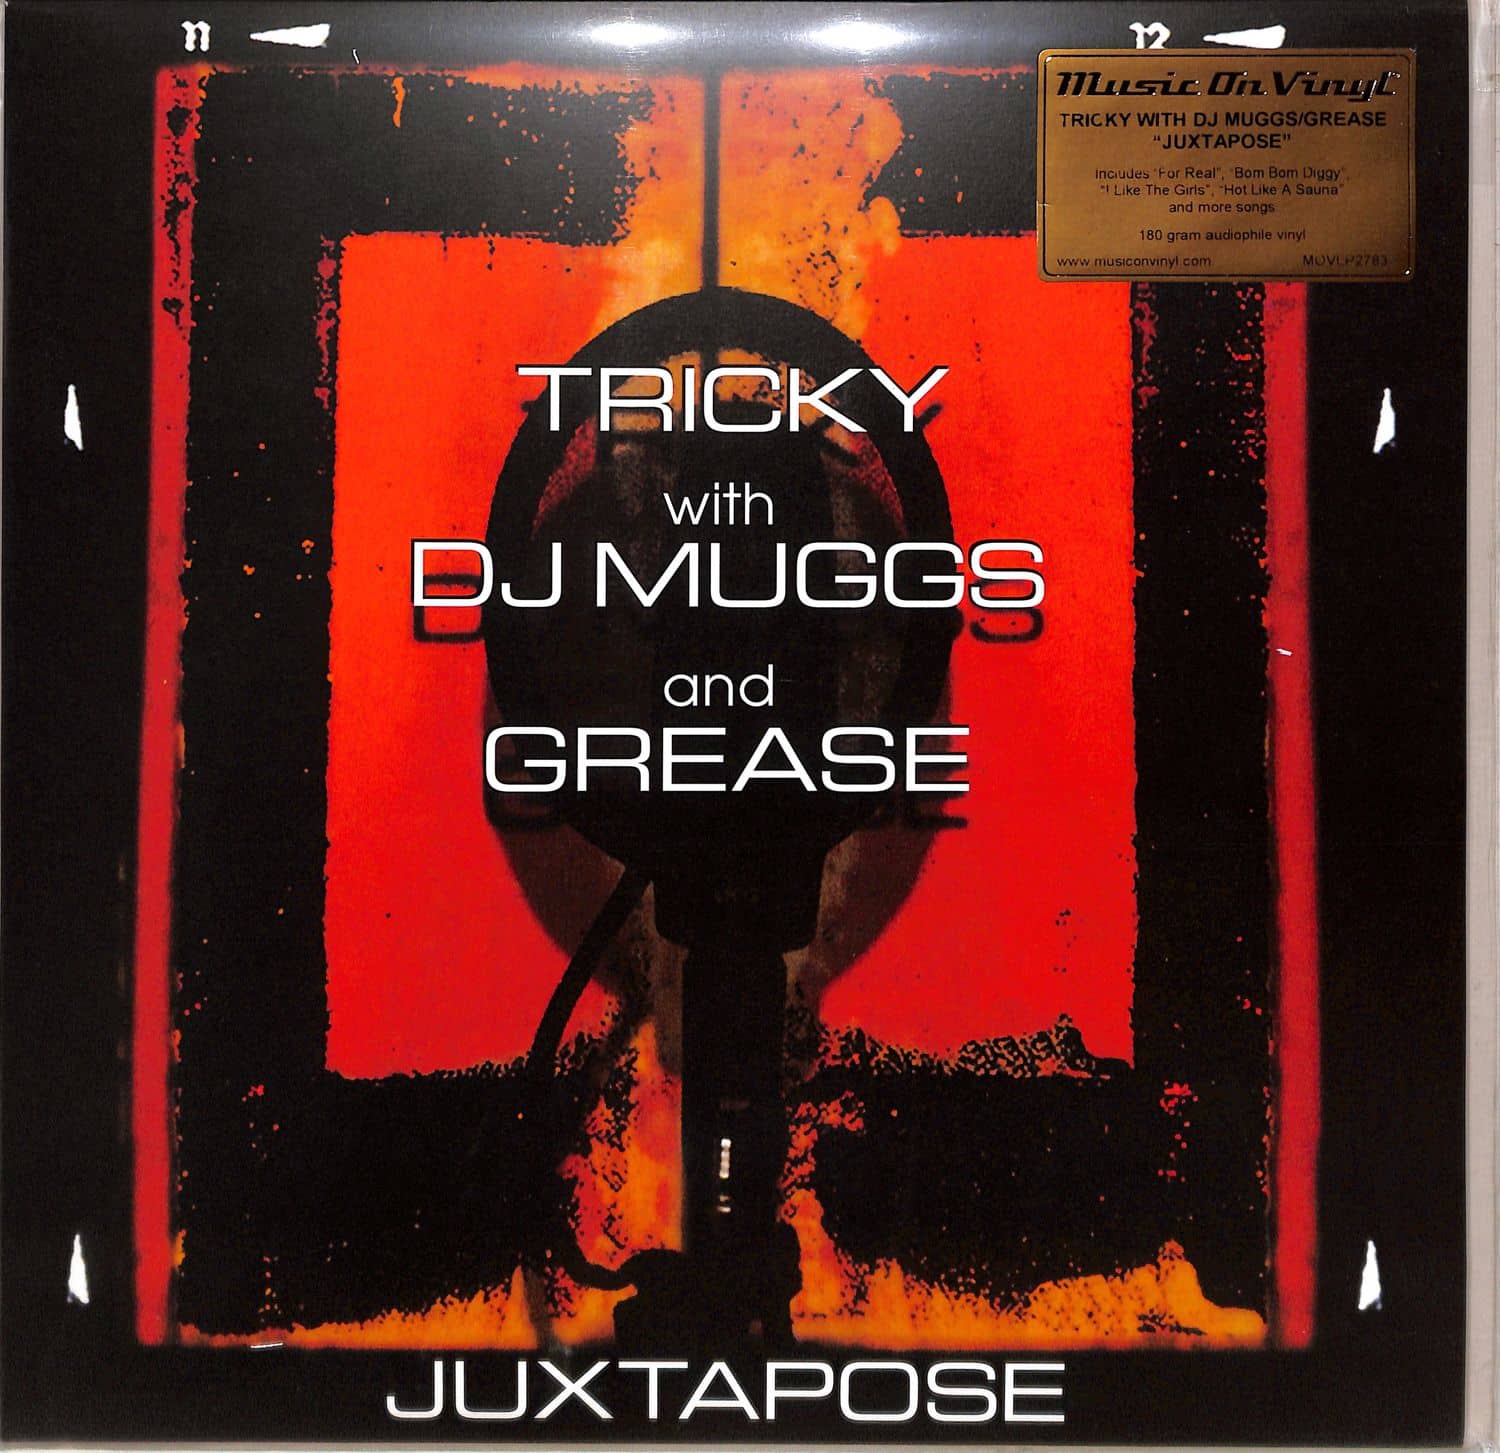 Tricky with DJ Muggs and Grease - JUXTAPOSE 